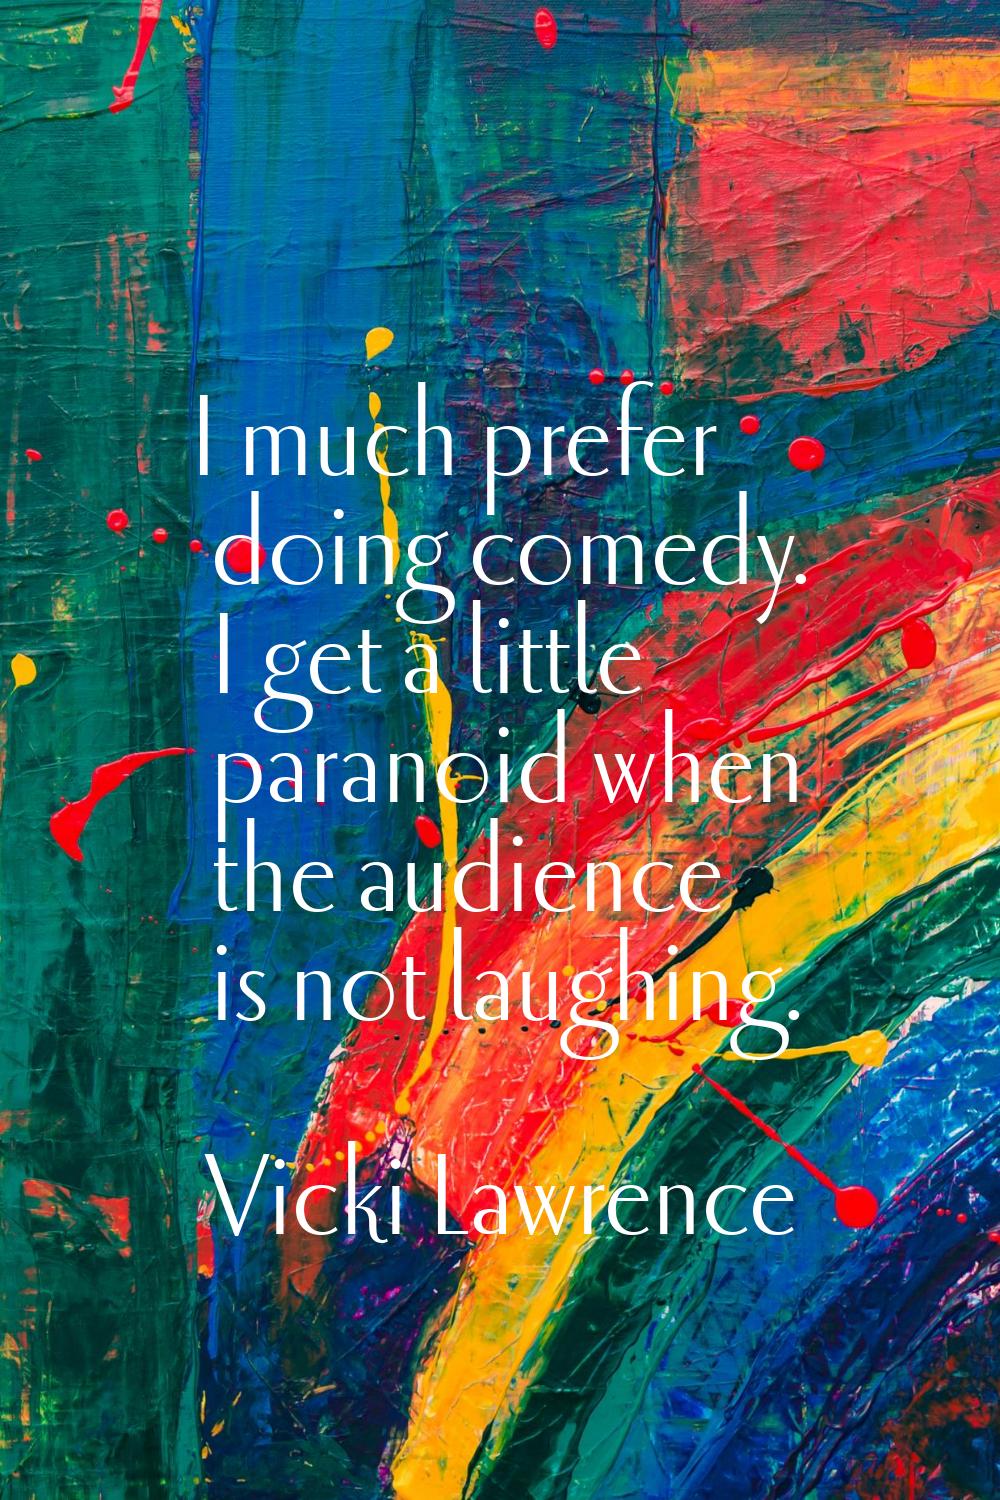 I much prefer doing comedy. I get a little paranoid when the audience is not laughing.